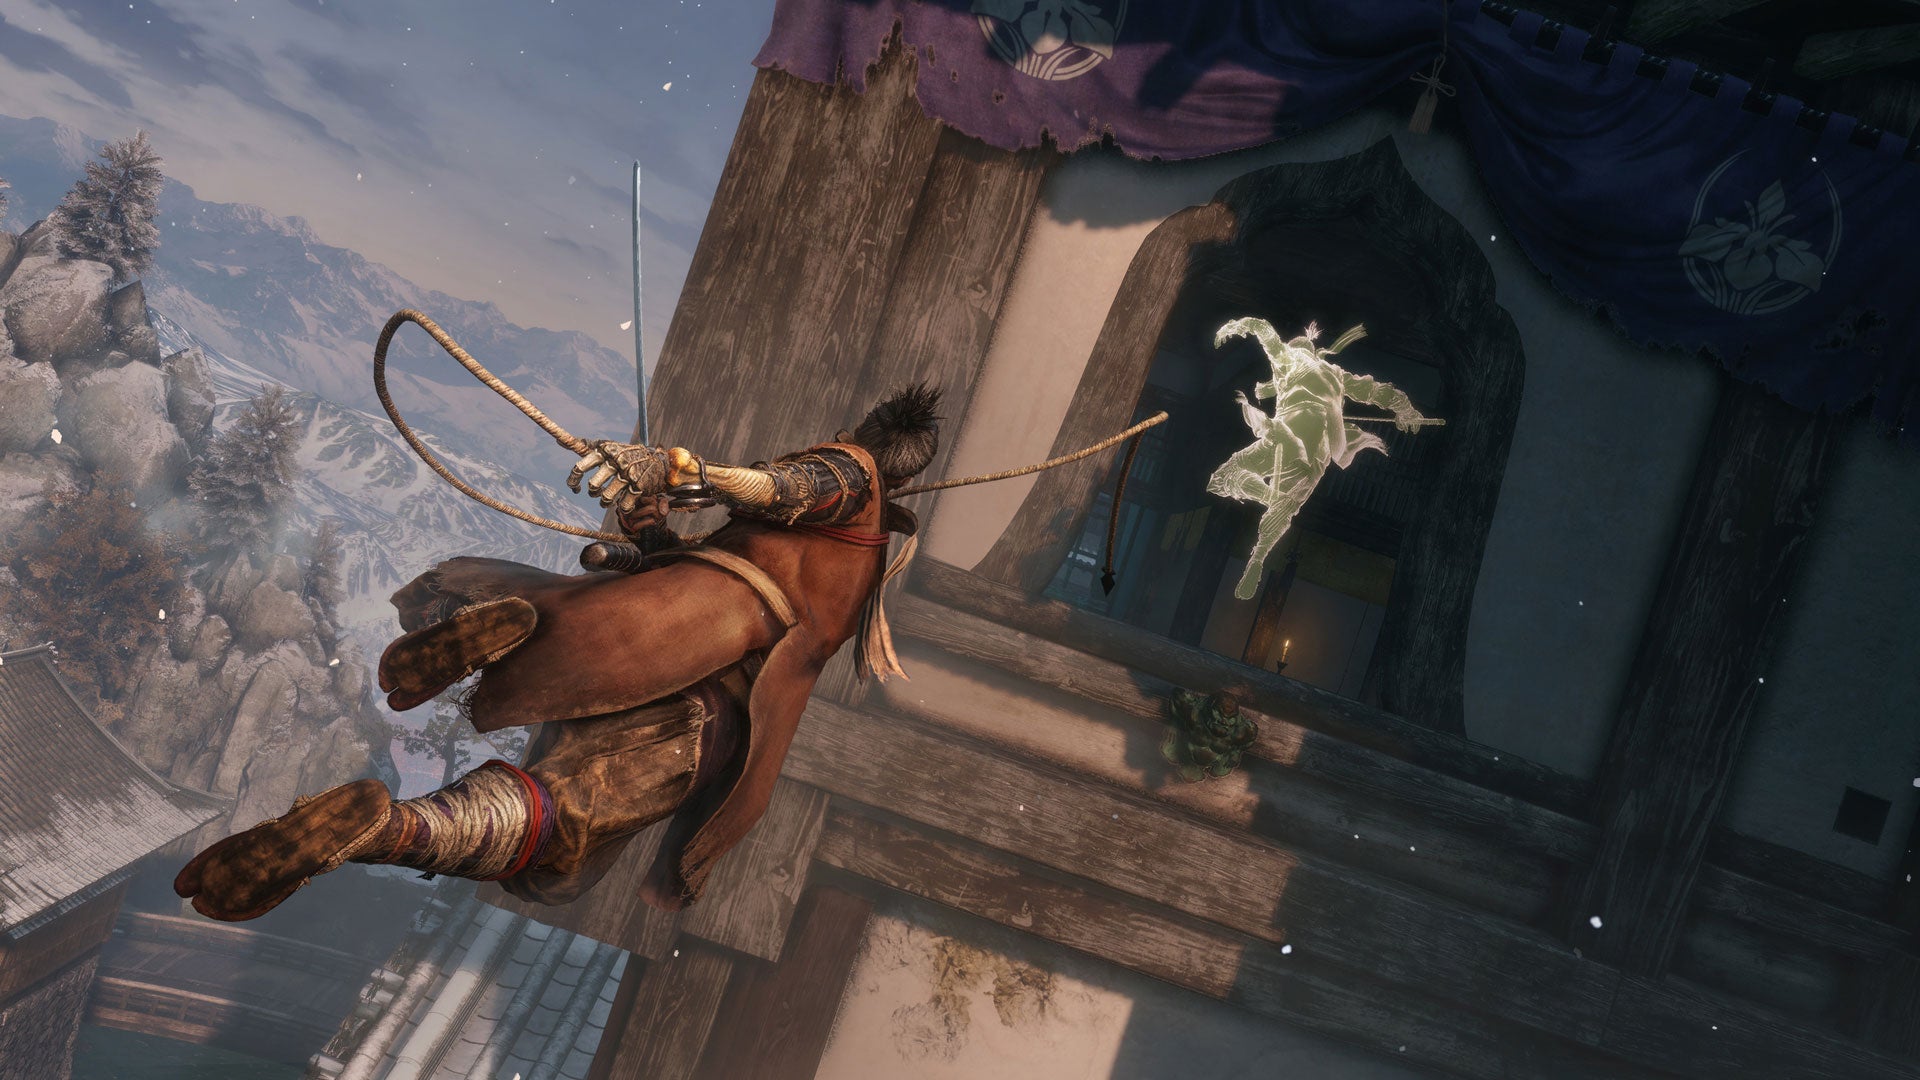 Use Sekiro: Shadows Die Twice weapons in Dark Souls 3 with this 